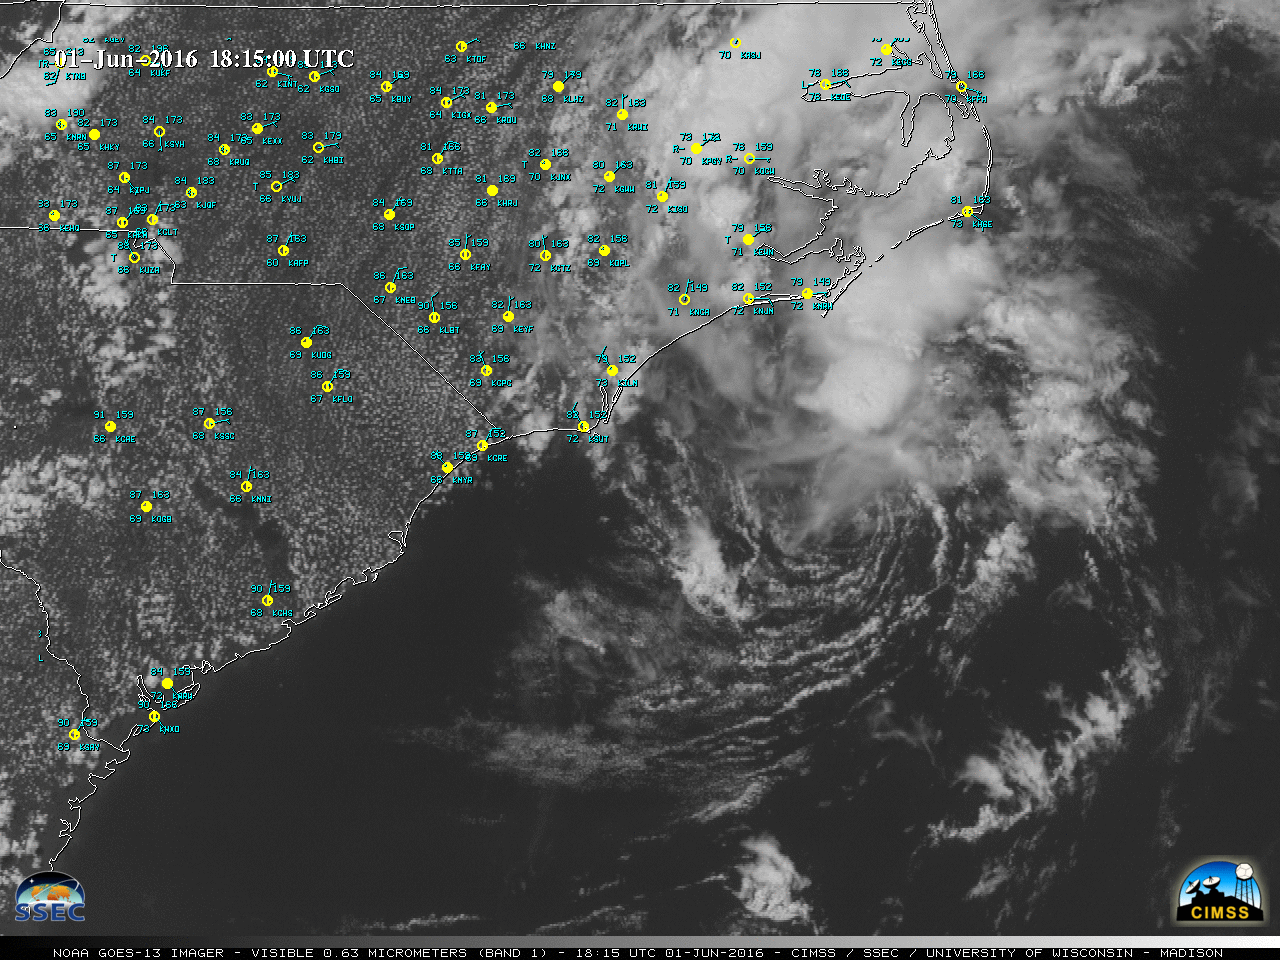 GOES-13 Visible (0.63 µm) images [click to play MP4 animation]